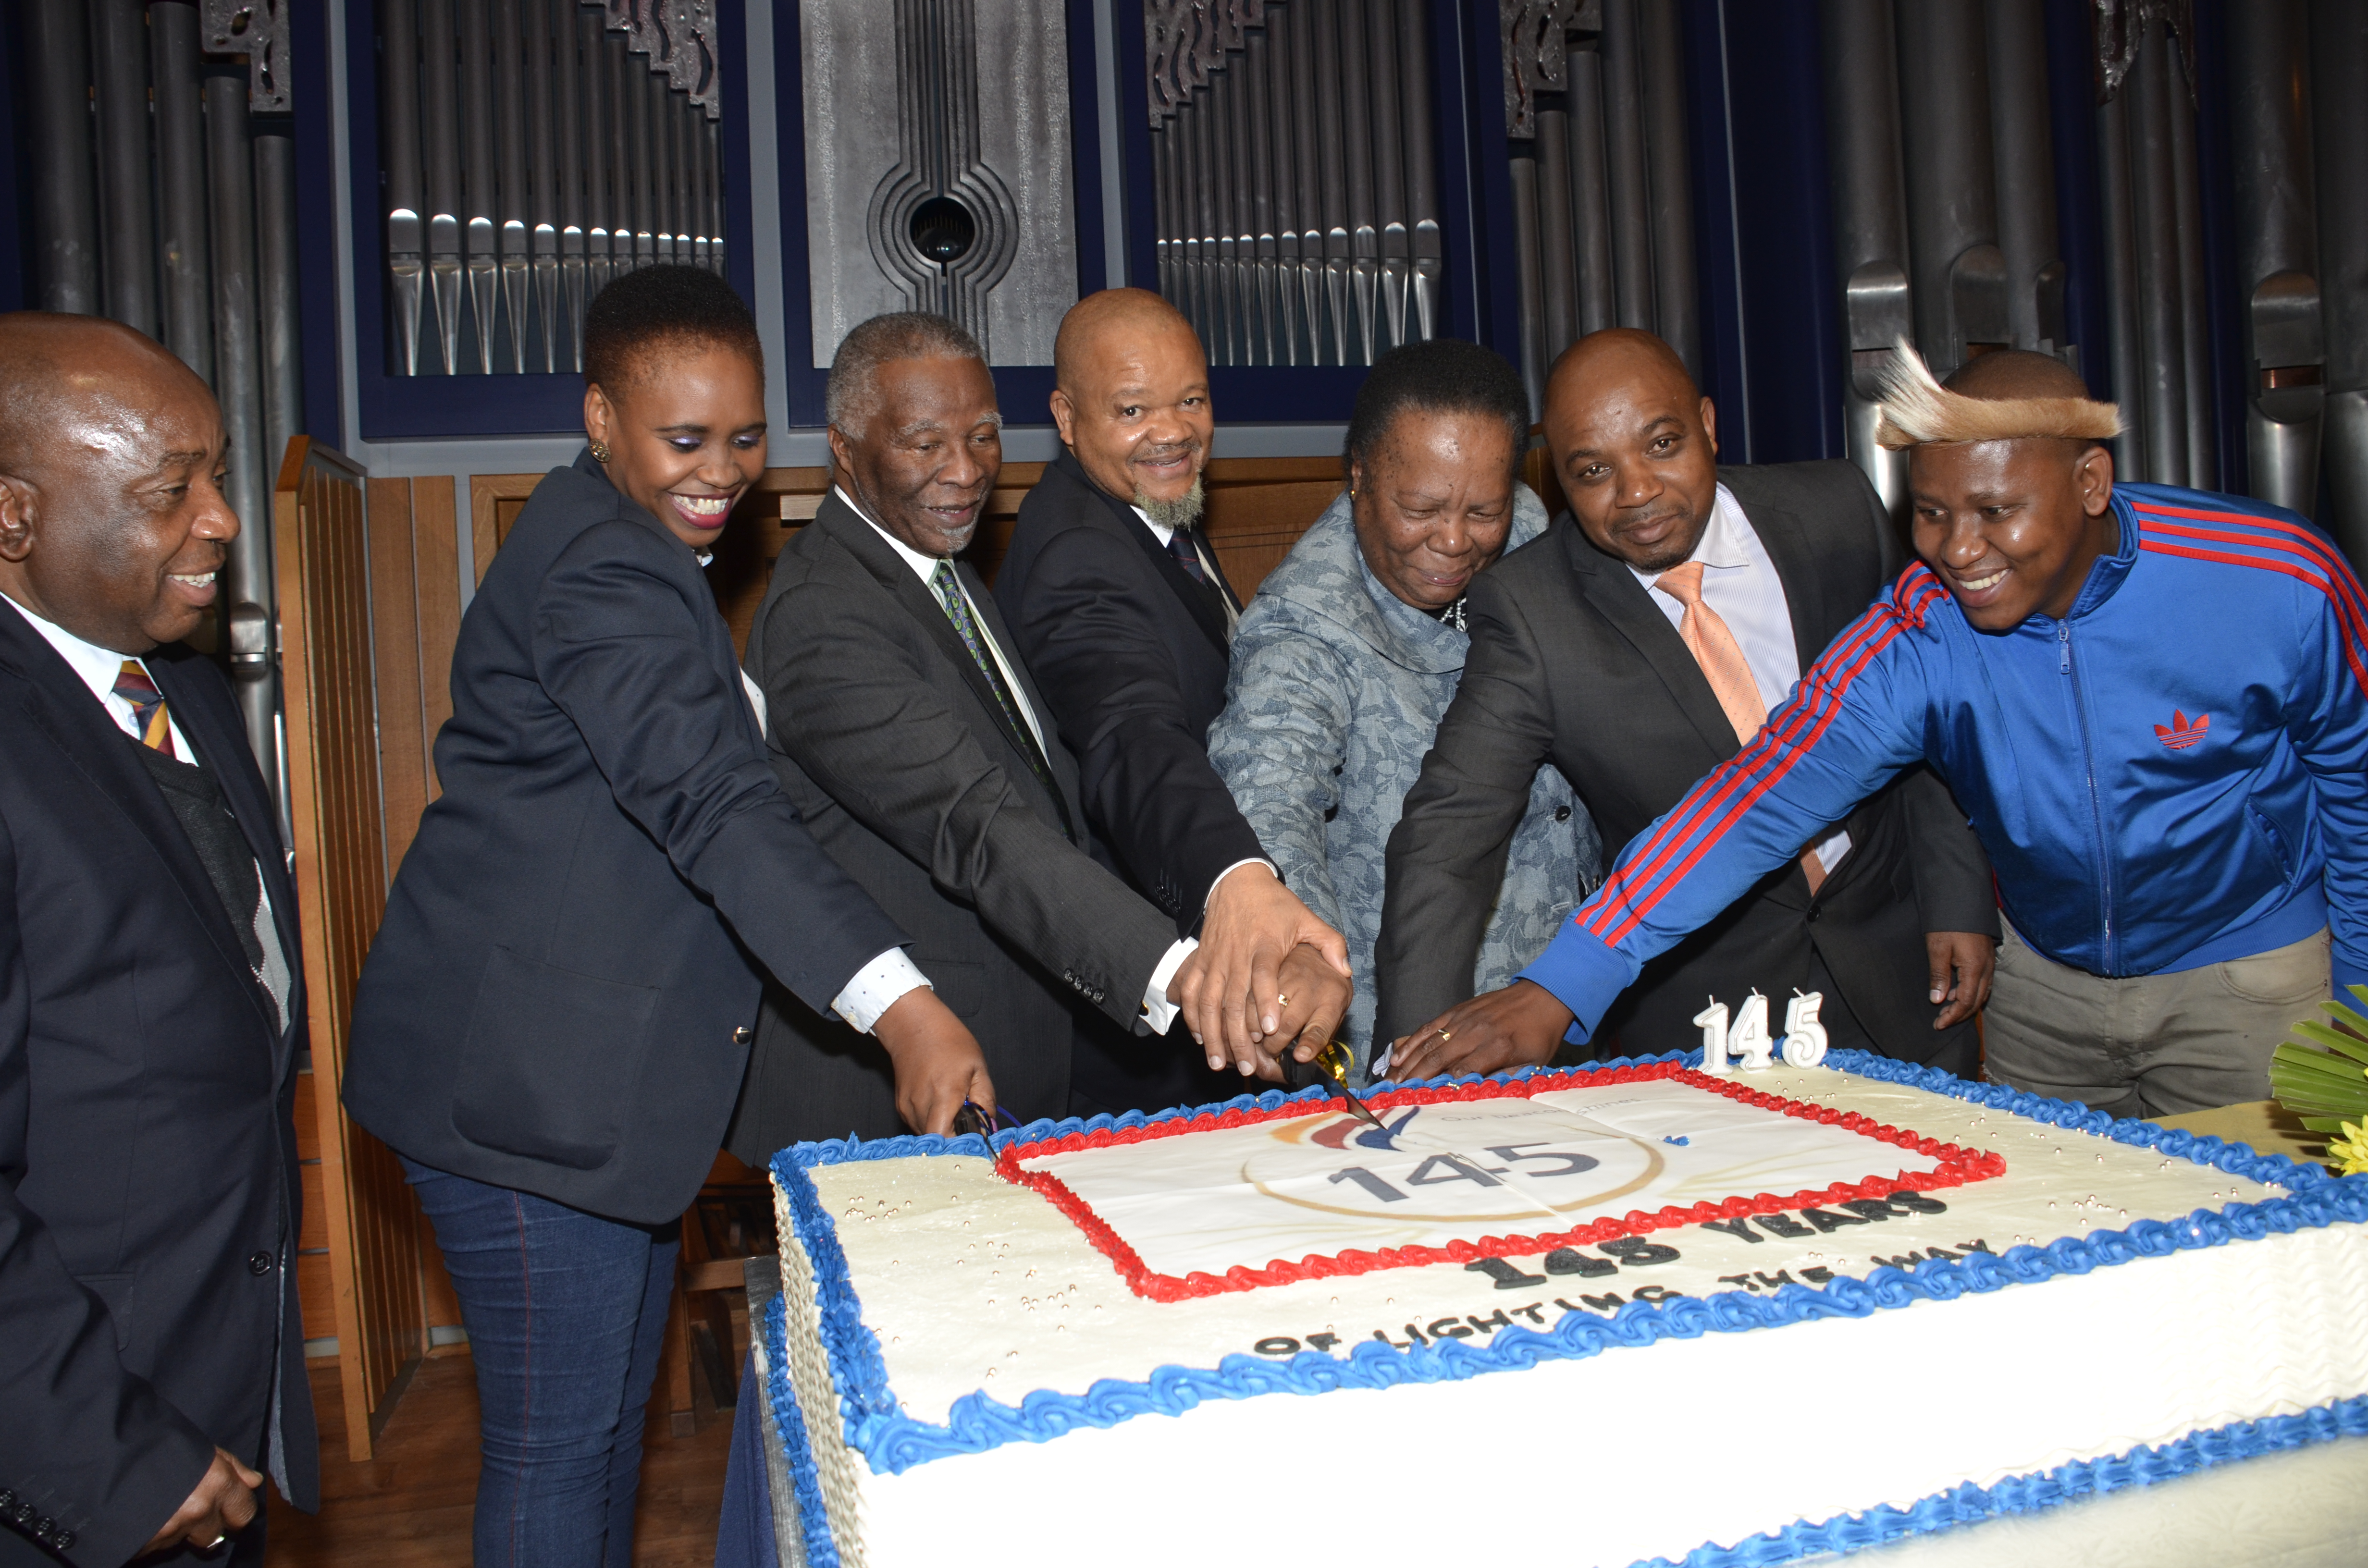 <p>With drama, drumbeats, dancing, declamation, and sheer delight, Unisans celebrated the 145th birthday of the venerable elder of South African universities on 4 July 2018. In the words of Professor Mandla Makhanya, Unisa Principal and Vice-Chancellor, “This university has nourished—and been nourished—by many generations of scholars, evident in the hundreds of thousands of Unisa graduates who represent every stratum in society and who are to be found in all echelons of society and public and private enterprise around the world—and who have served and achieved with distinction.”</p>